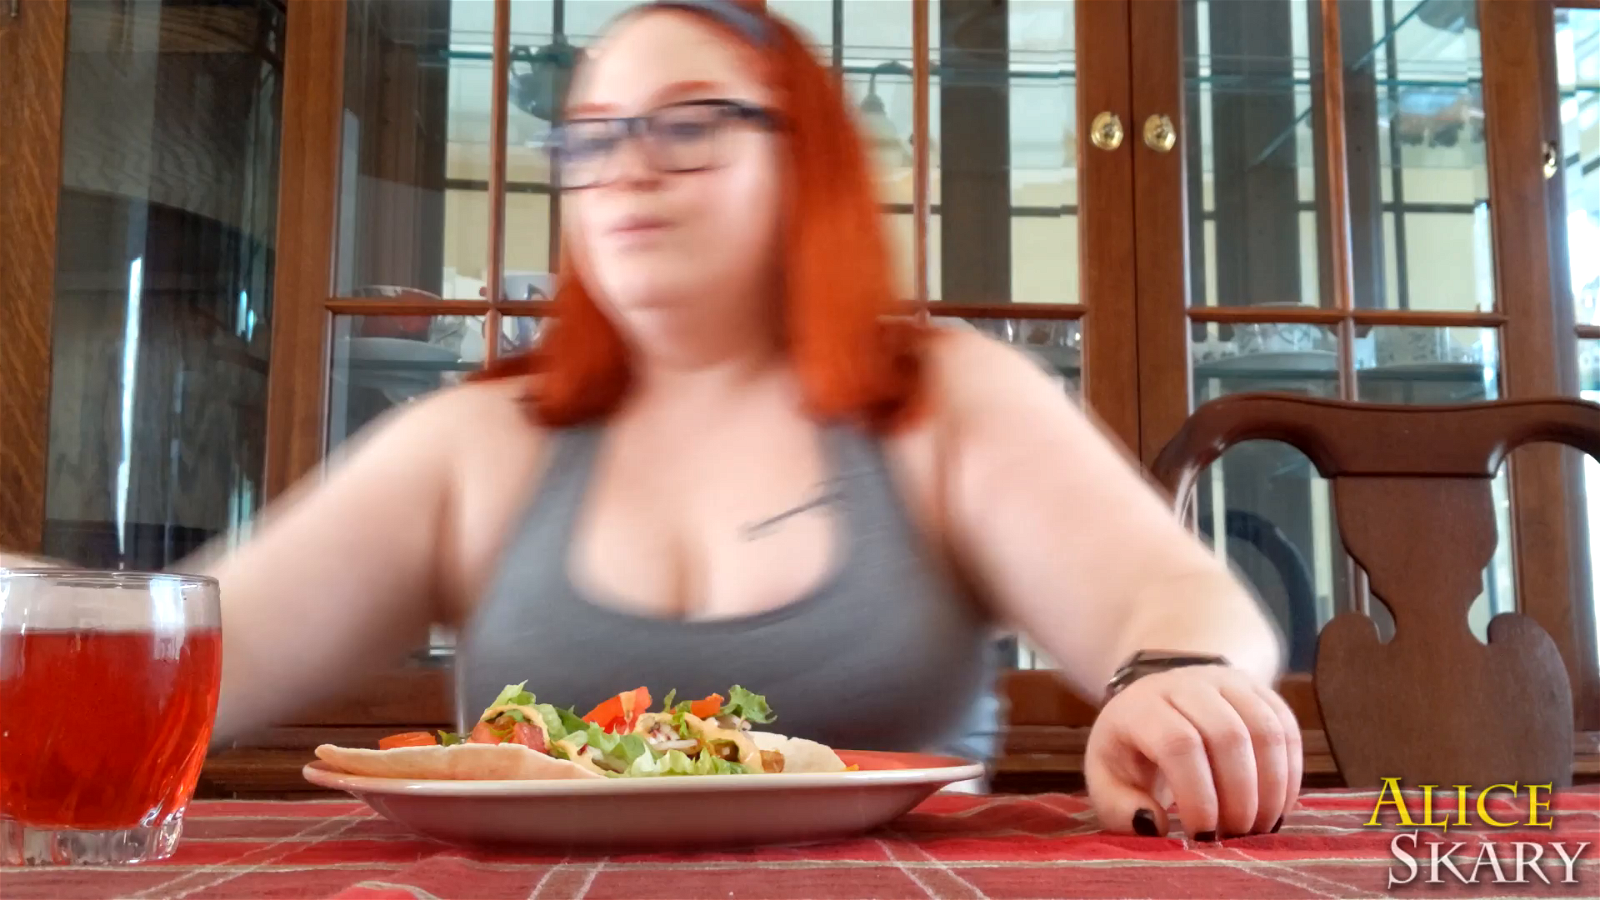 Video by Alice Skary with the username @aliceskary, who is a star user,  January 7, 2020 at 1:23 AM. The post is about the topic SFW Food and the text says 'i couldn't find any better topic to put this glorious mukbang teaser in! omg tacosssssssssss'